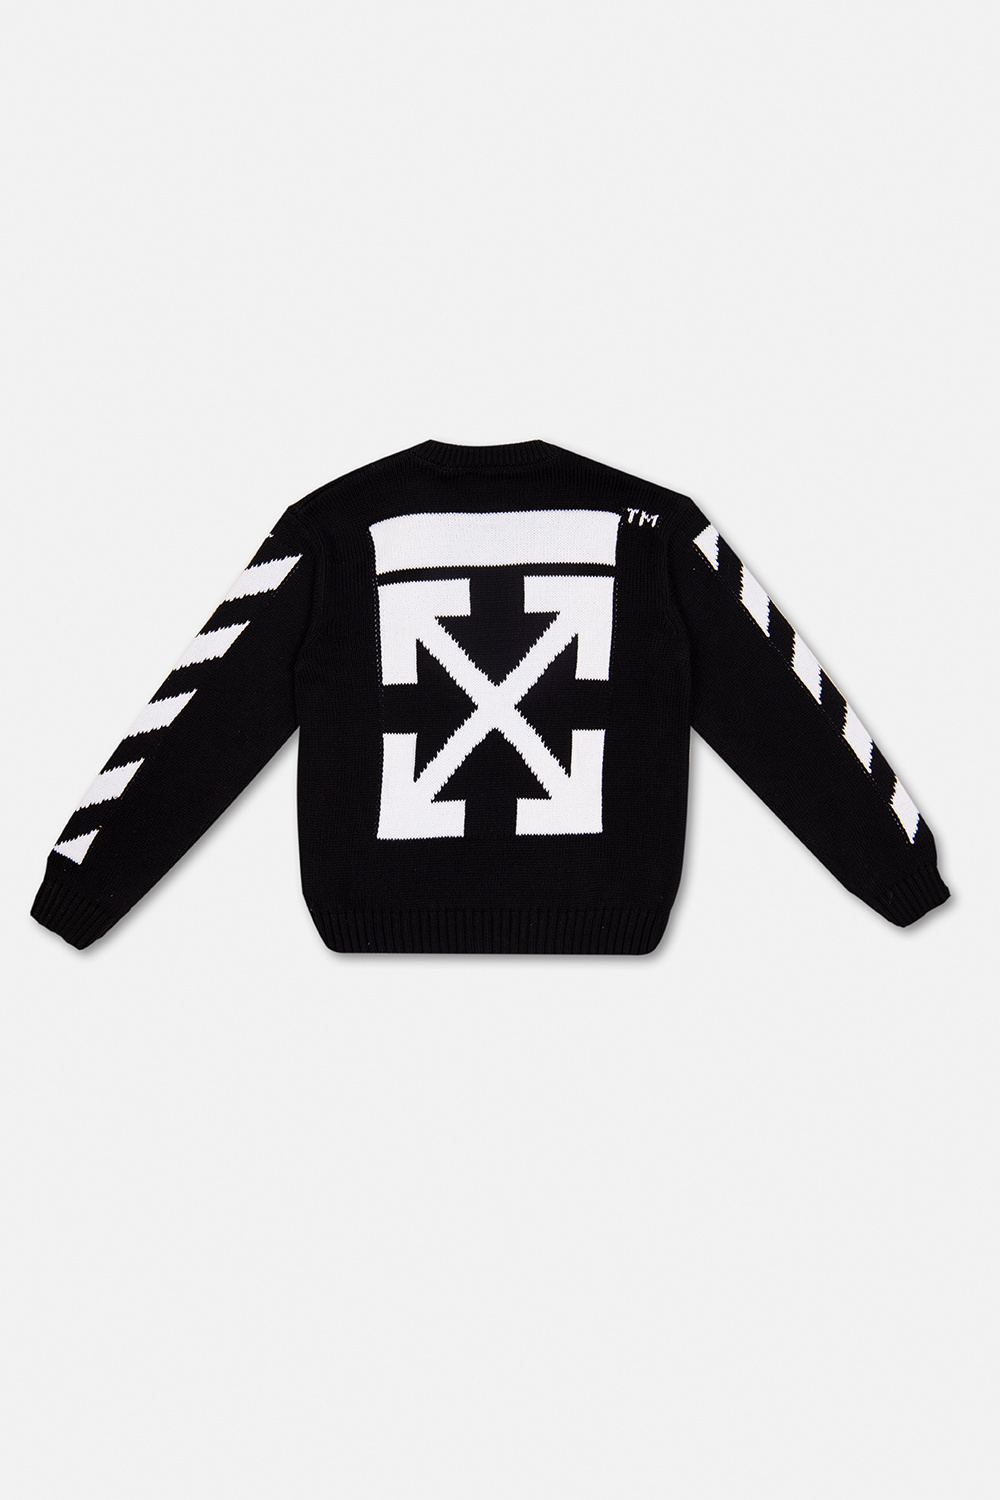 Off-White Kids USA Pro Overhead Cropped Hoodie Junior Girls